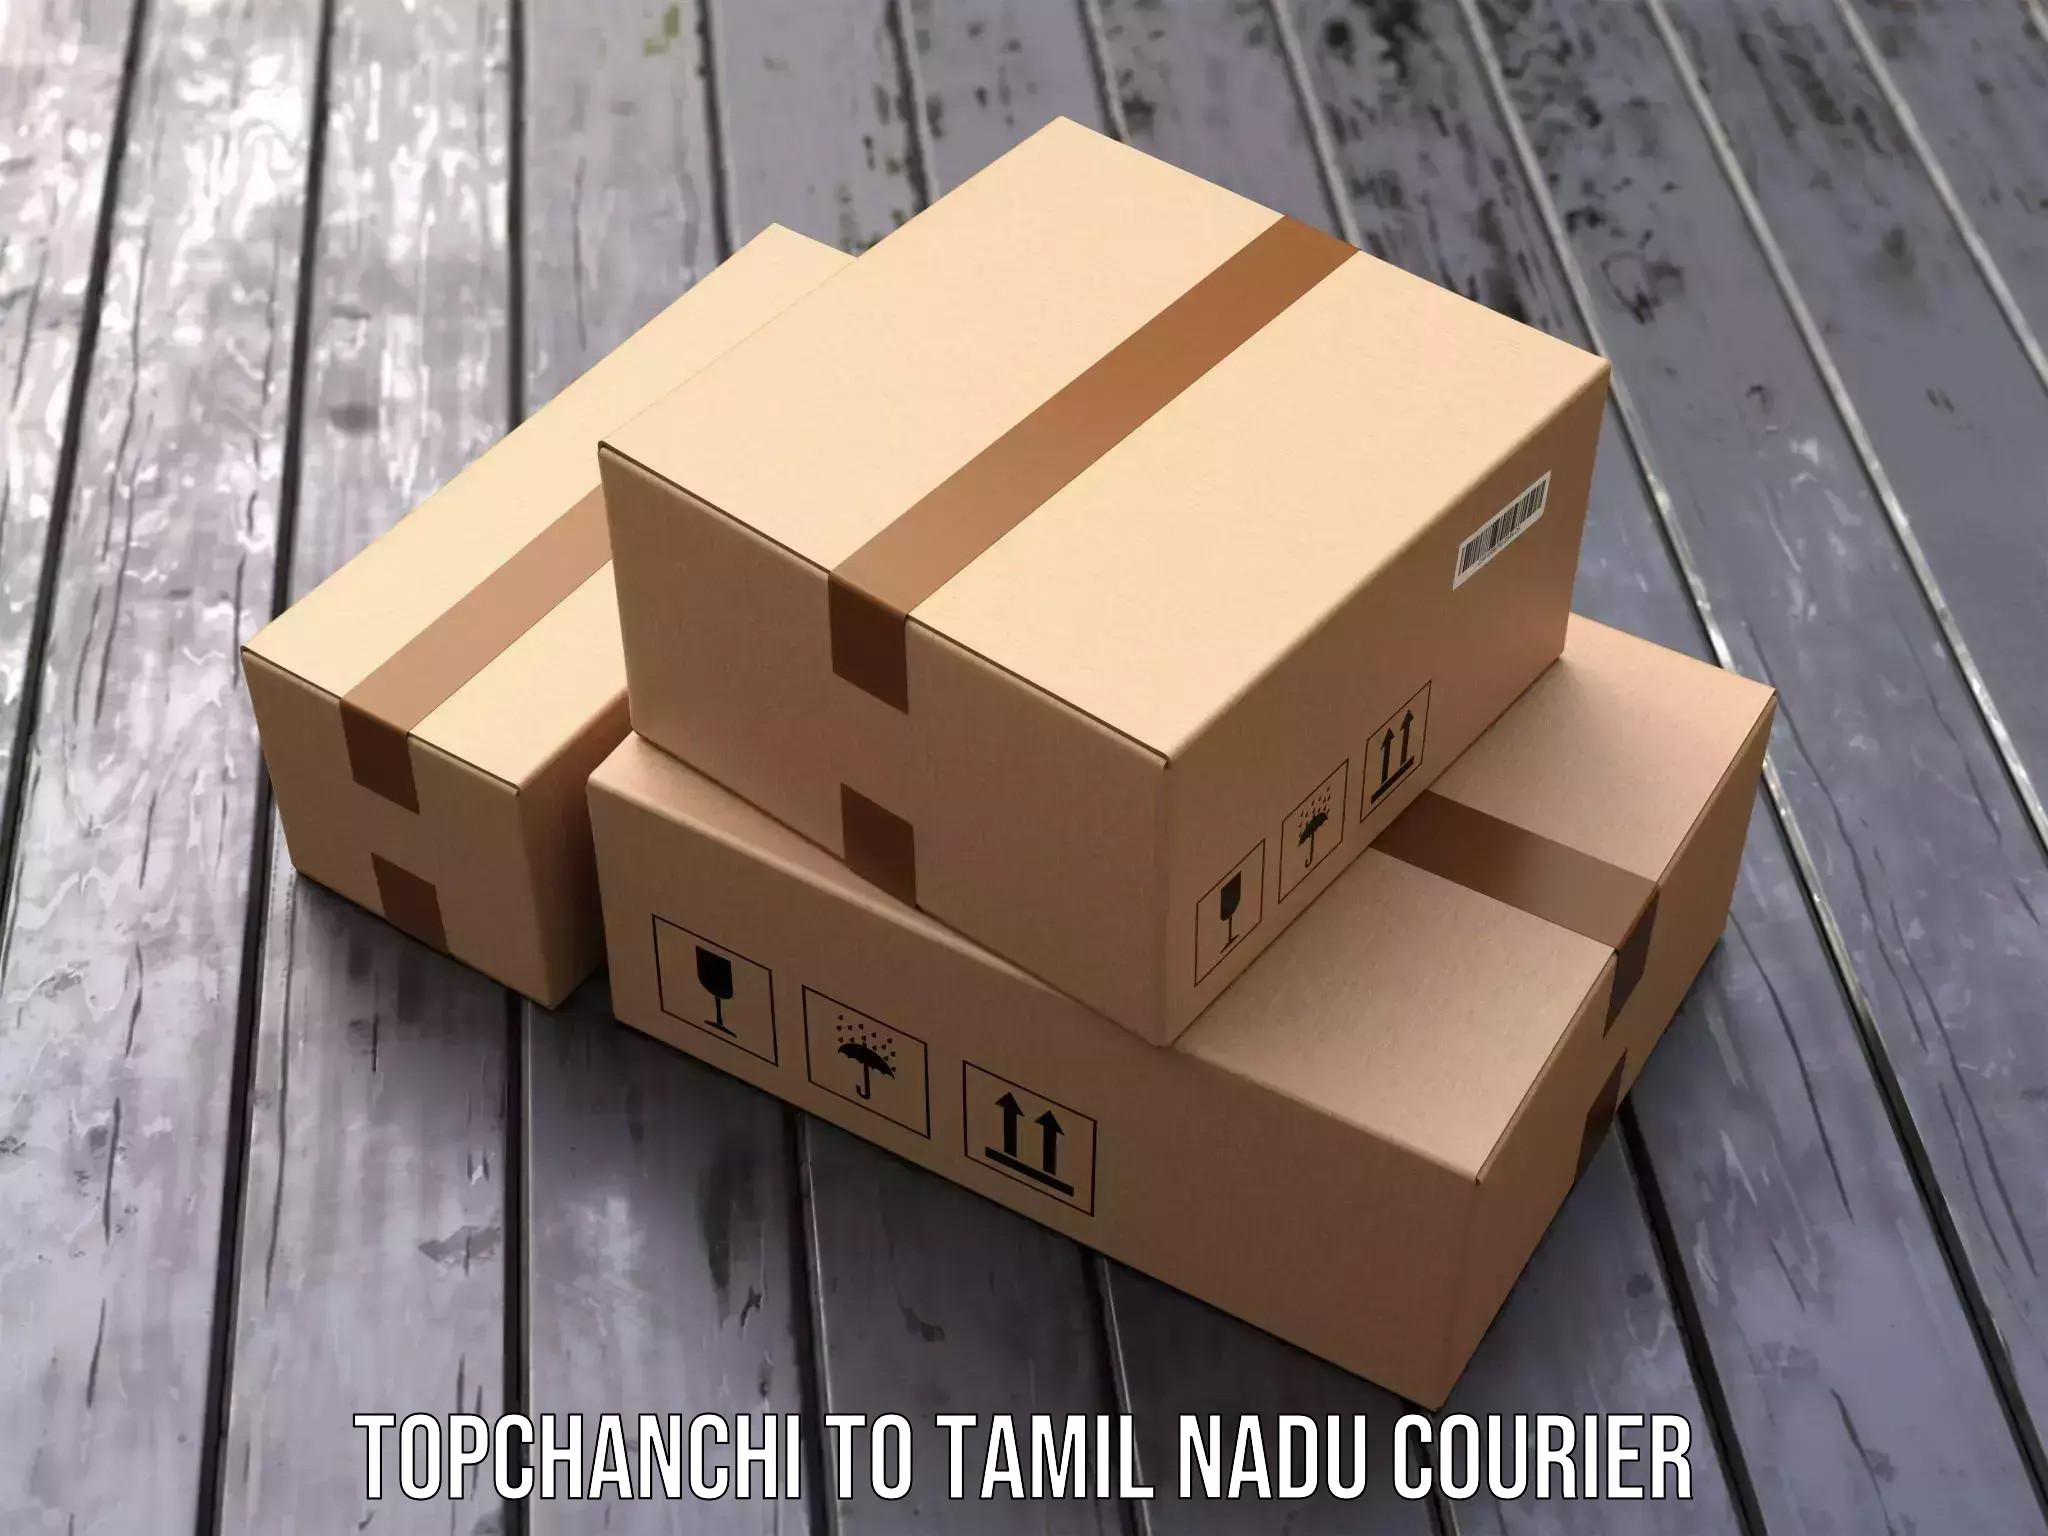 Express package transport Topchanchi to Vellore